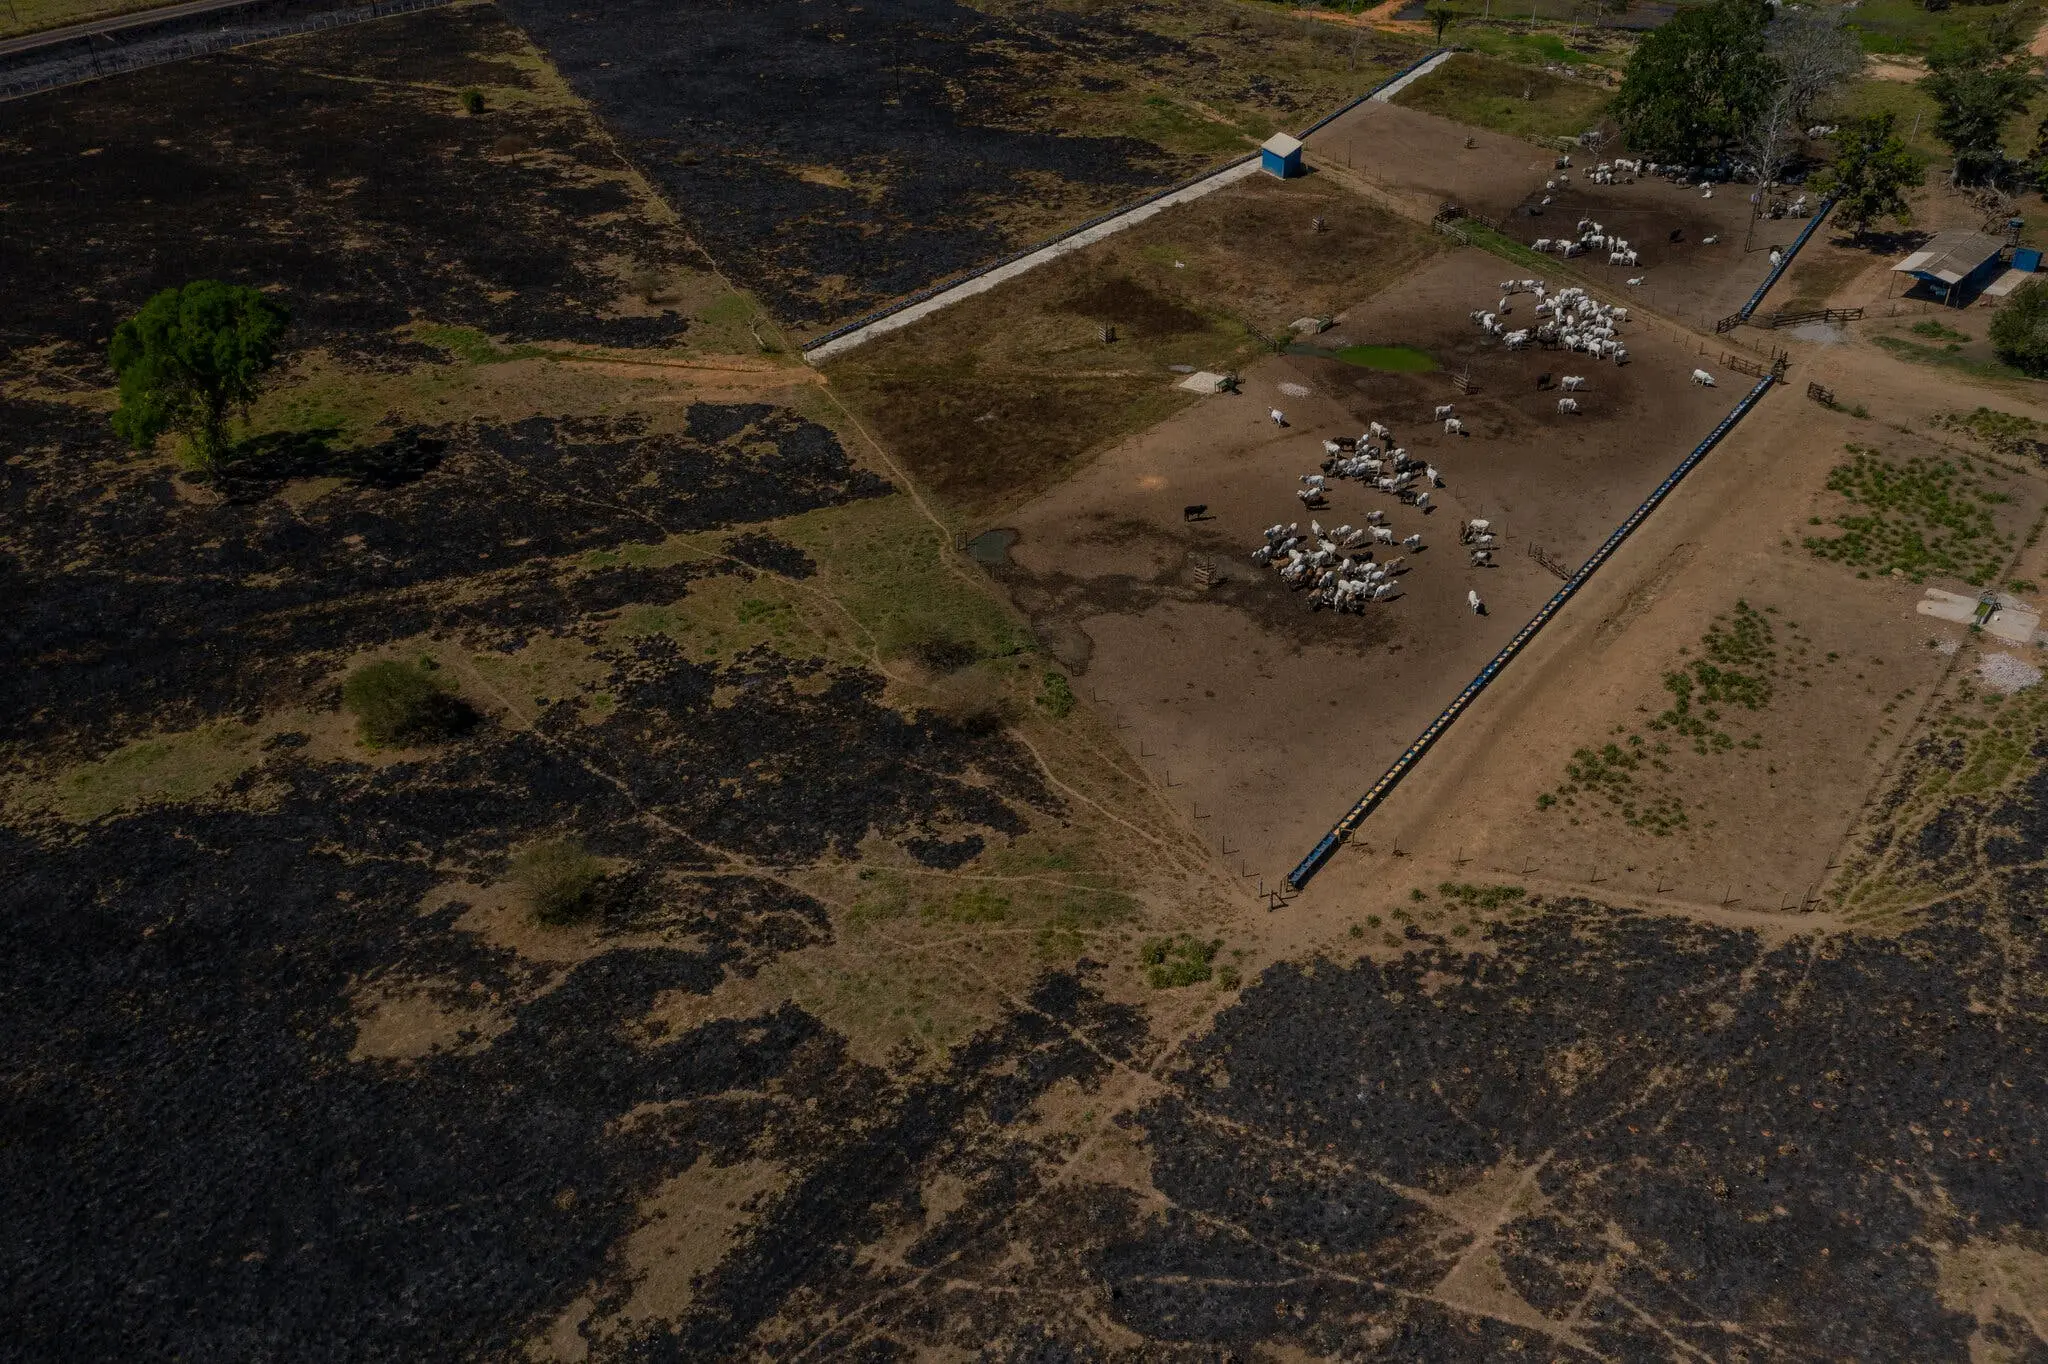 A farm on the edge of a burned area shows cattle gathered